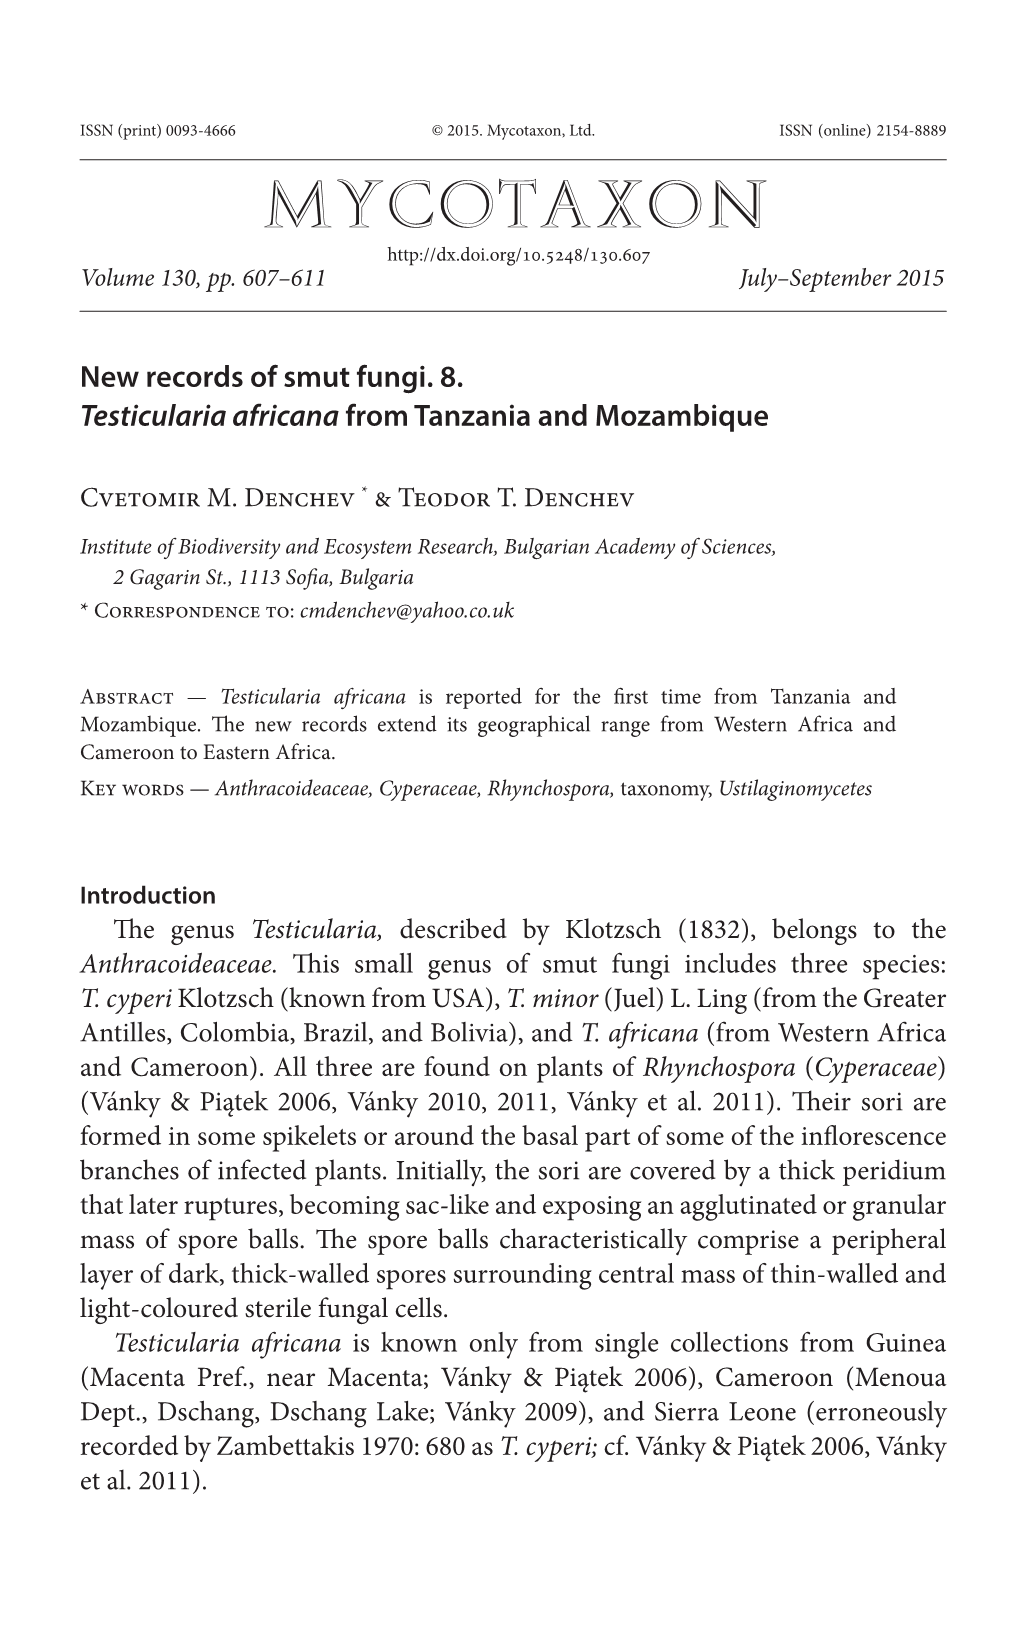 New Records of Smut Fungi. 8. &lt;I&gt;Testicularia